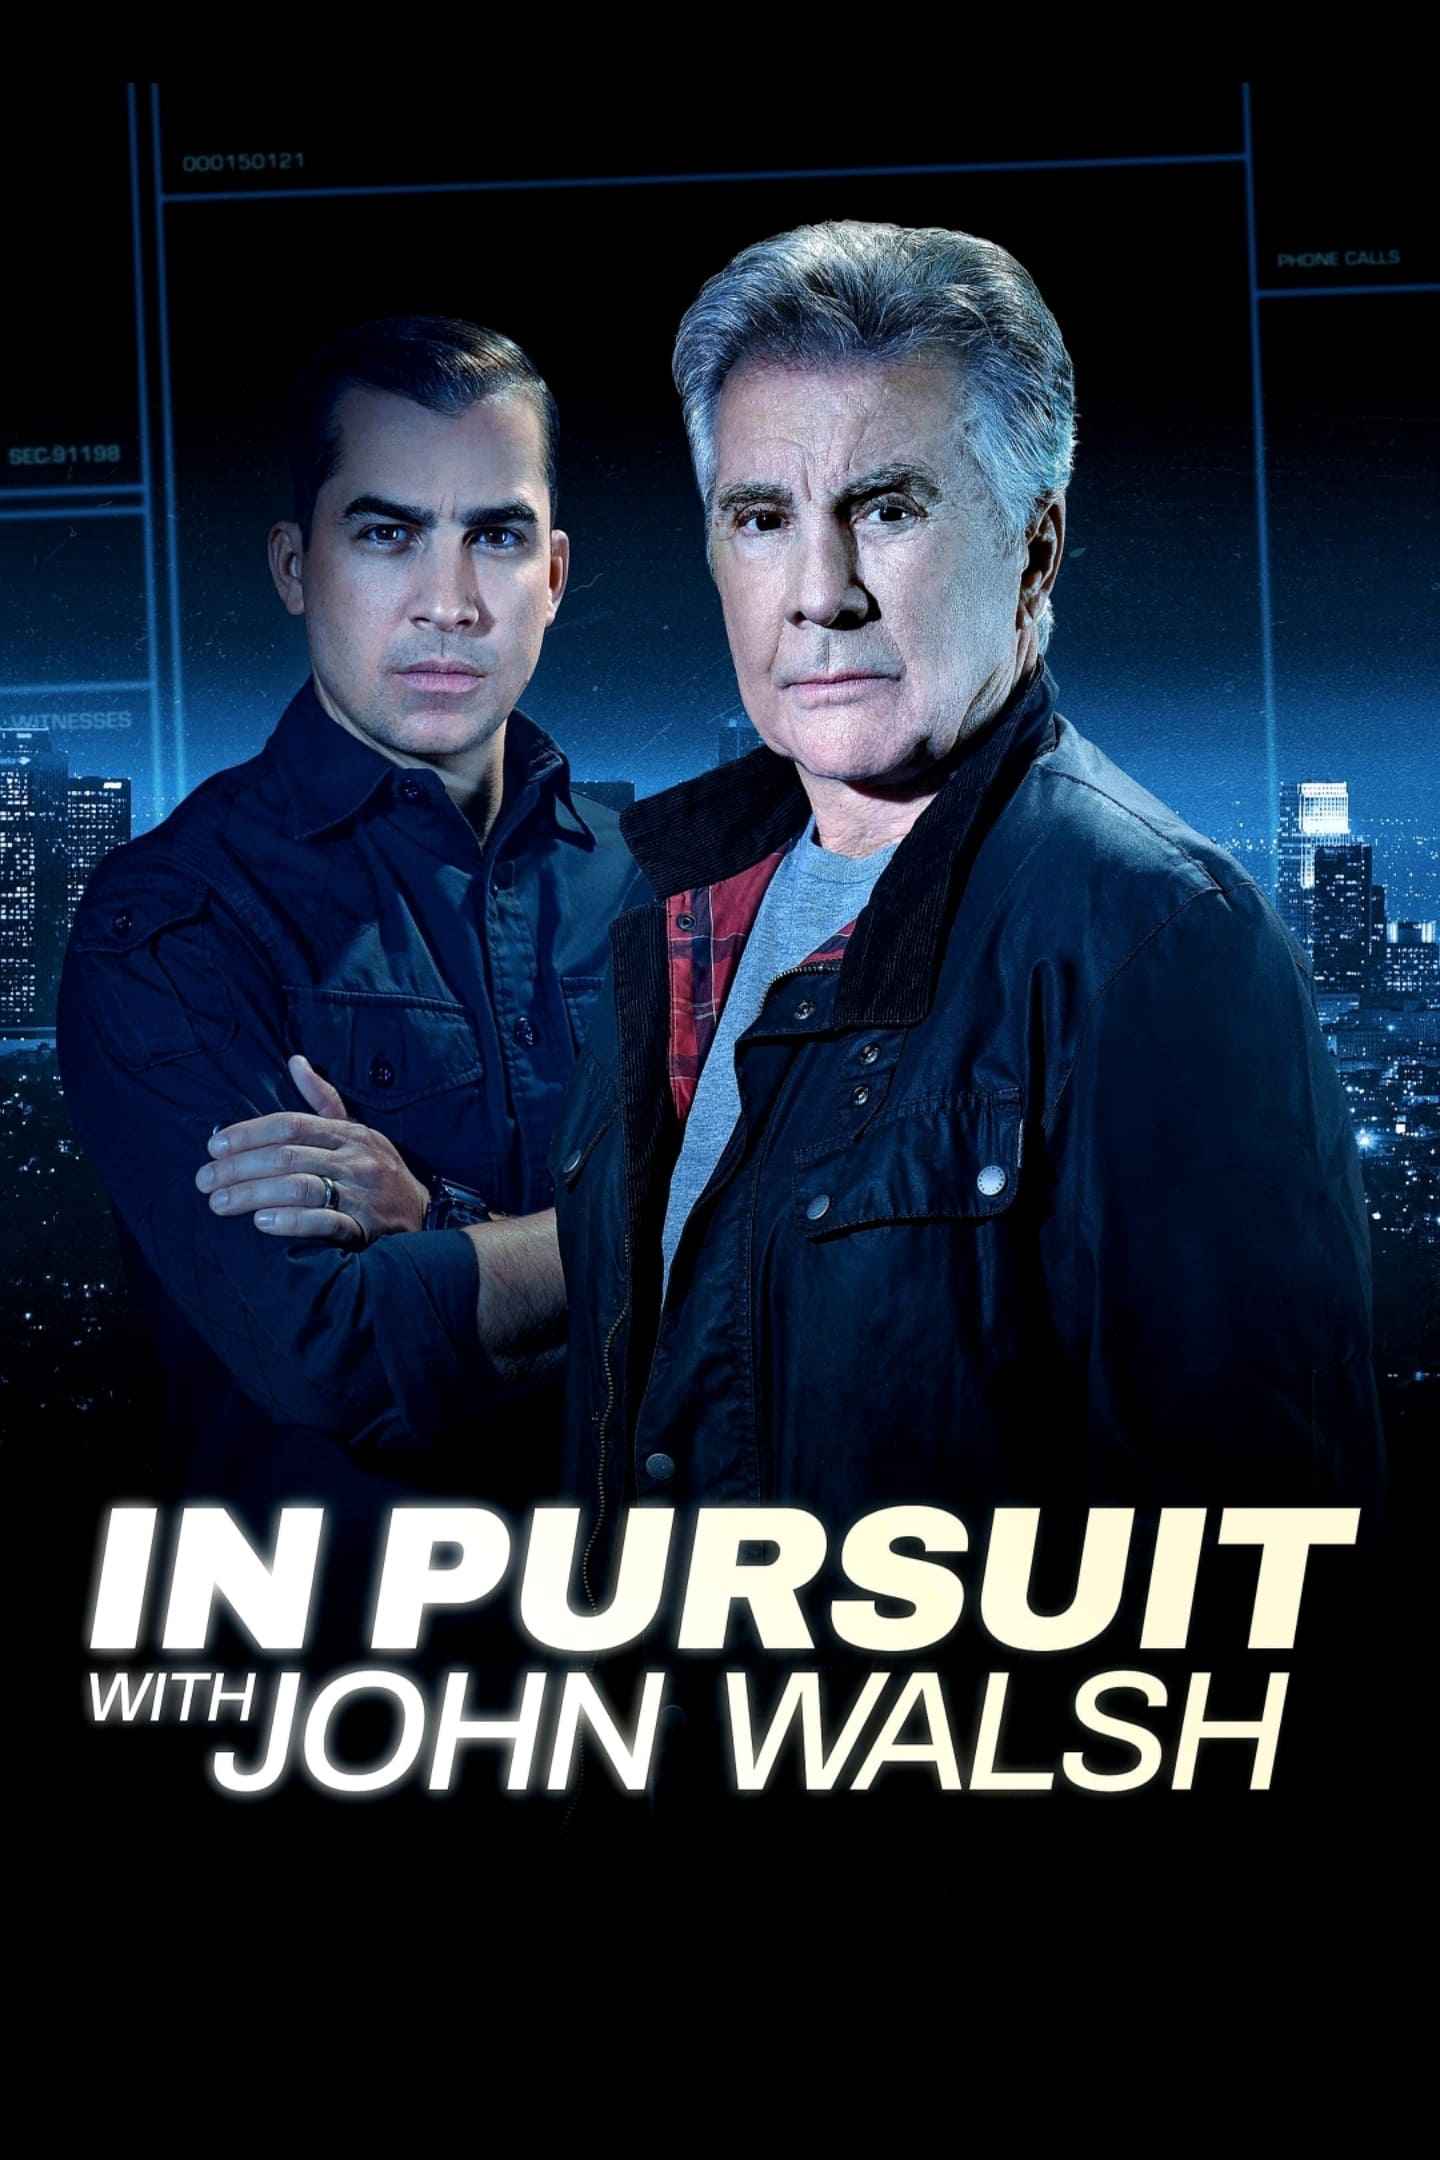 In Pursuit with John Walsh TV Shows About Missing Child